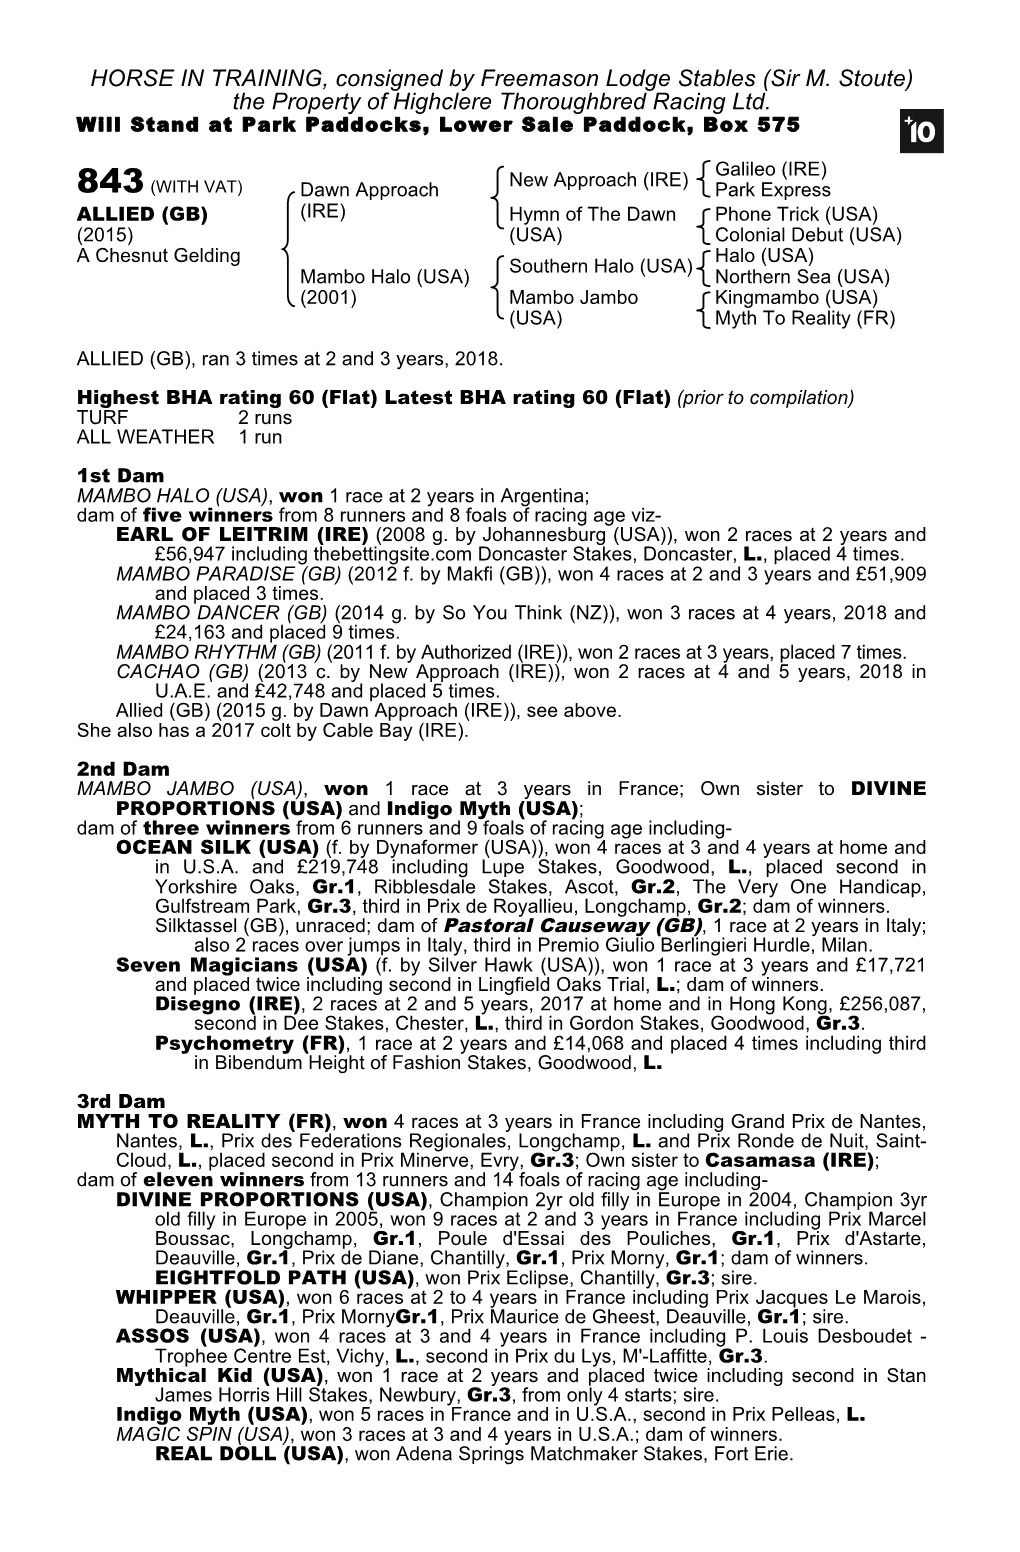 HORSE in TRAINING, Consigned by Freemason Lodge Stables (Sir M. Stoute) the Property of Highclere Thoroughbred Racing Ltd